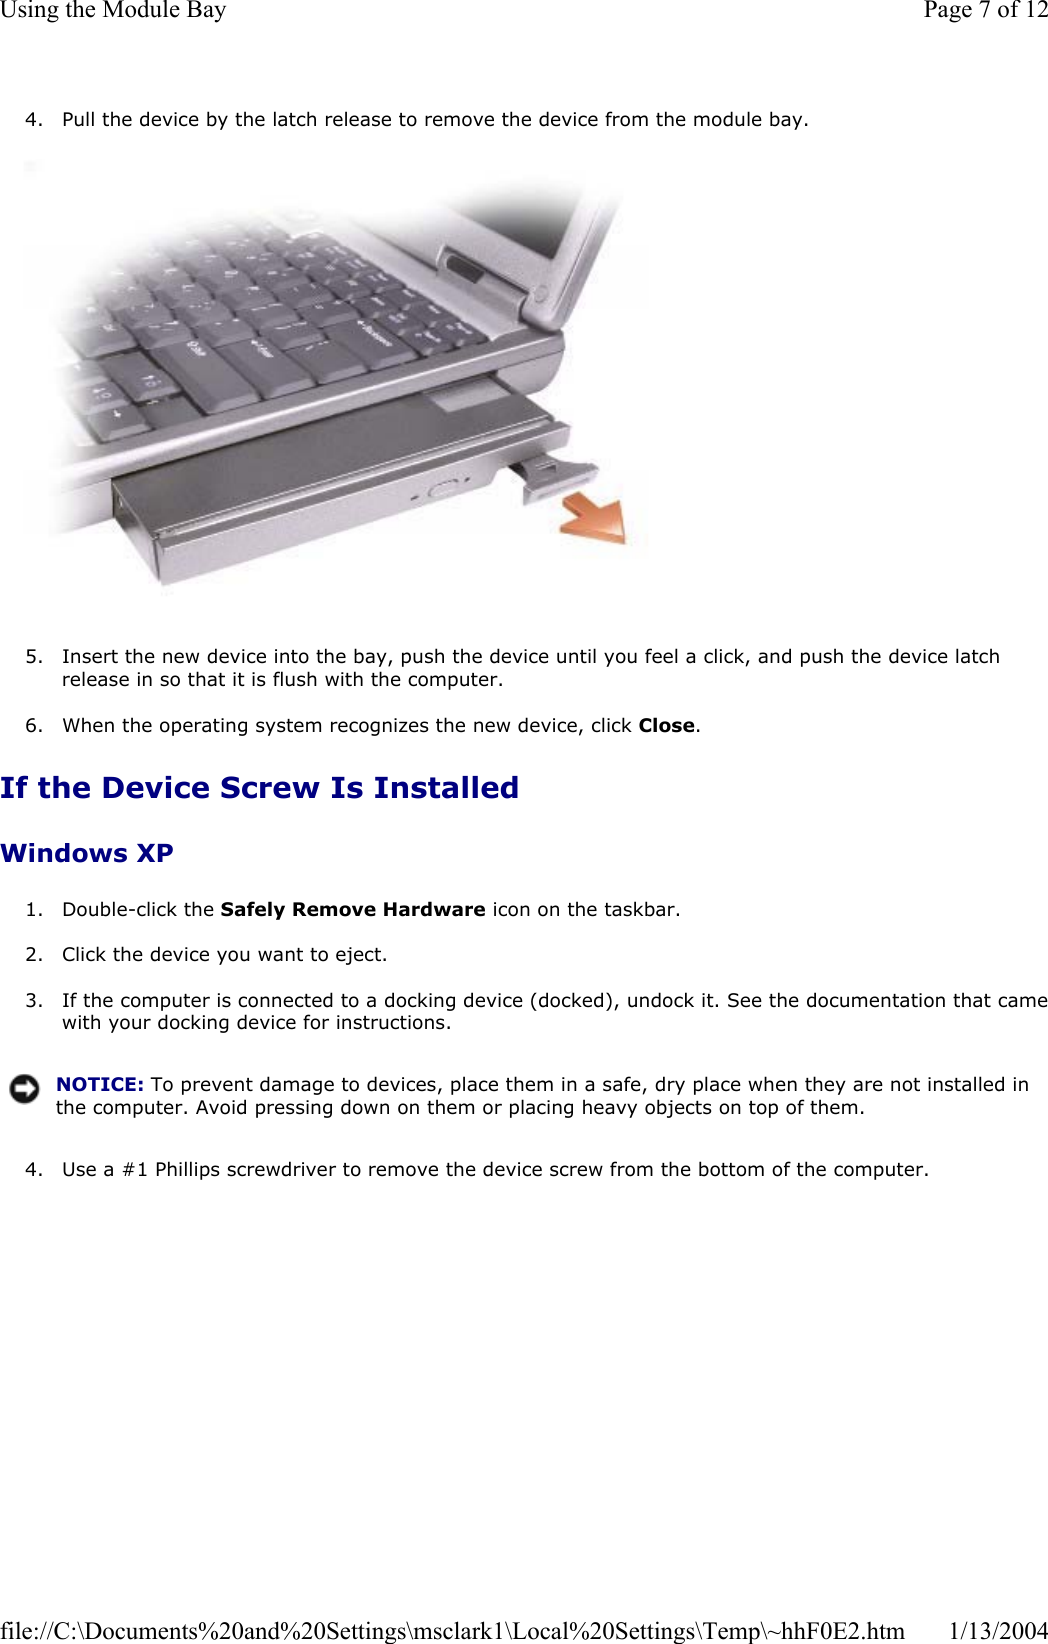 4. Pull the device by the latch release to remove the device from the module bay. 5. Insert the new device into the bay, push the device until you feel a click, and push the device latch release in so that it is flush with the computer. 6. When the operating system recognizes the new device, click Close.If the Device Screw Is Installed Windows XP 1. Double-click the Safely Remove Hardware icon on the taskbar. 2. Click the device you want to eject. 3. If the computer is connected to a docking device (docked), undock it. See the documentation that camewith your docking device for instructions. 4. Use a #1 Phillips screwdriver to remove the device screw from the bottom of the computer. NOTICE: To prevent damage to devices, place them in a safe, dry place when they are not installed in the computer. Avoid pressing down on them or placing heavy objects on top of them.Page 7 of 12Using the Module Bay1/13/2004file://C:\Documents%20and%20Settings\msclark1\Local%20Settings\Temp\~hhF0E2.htm